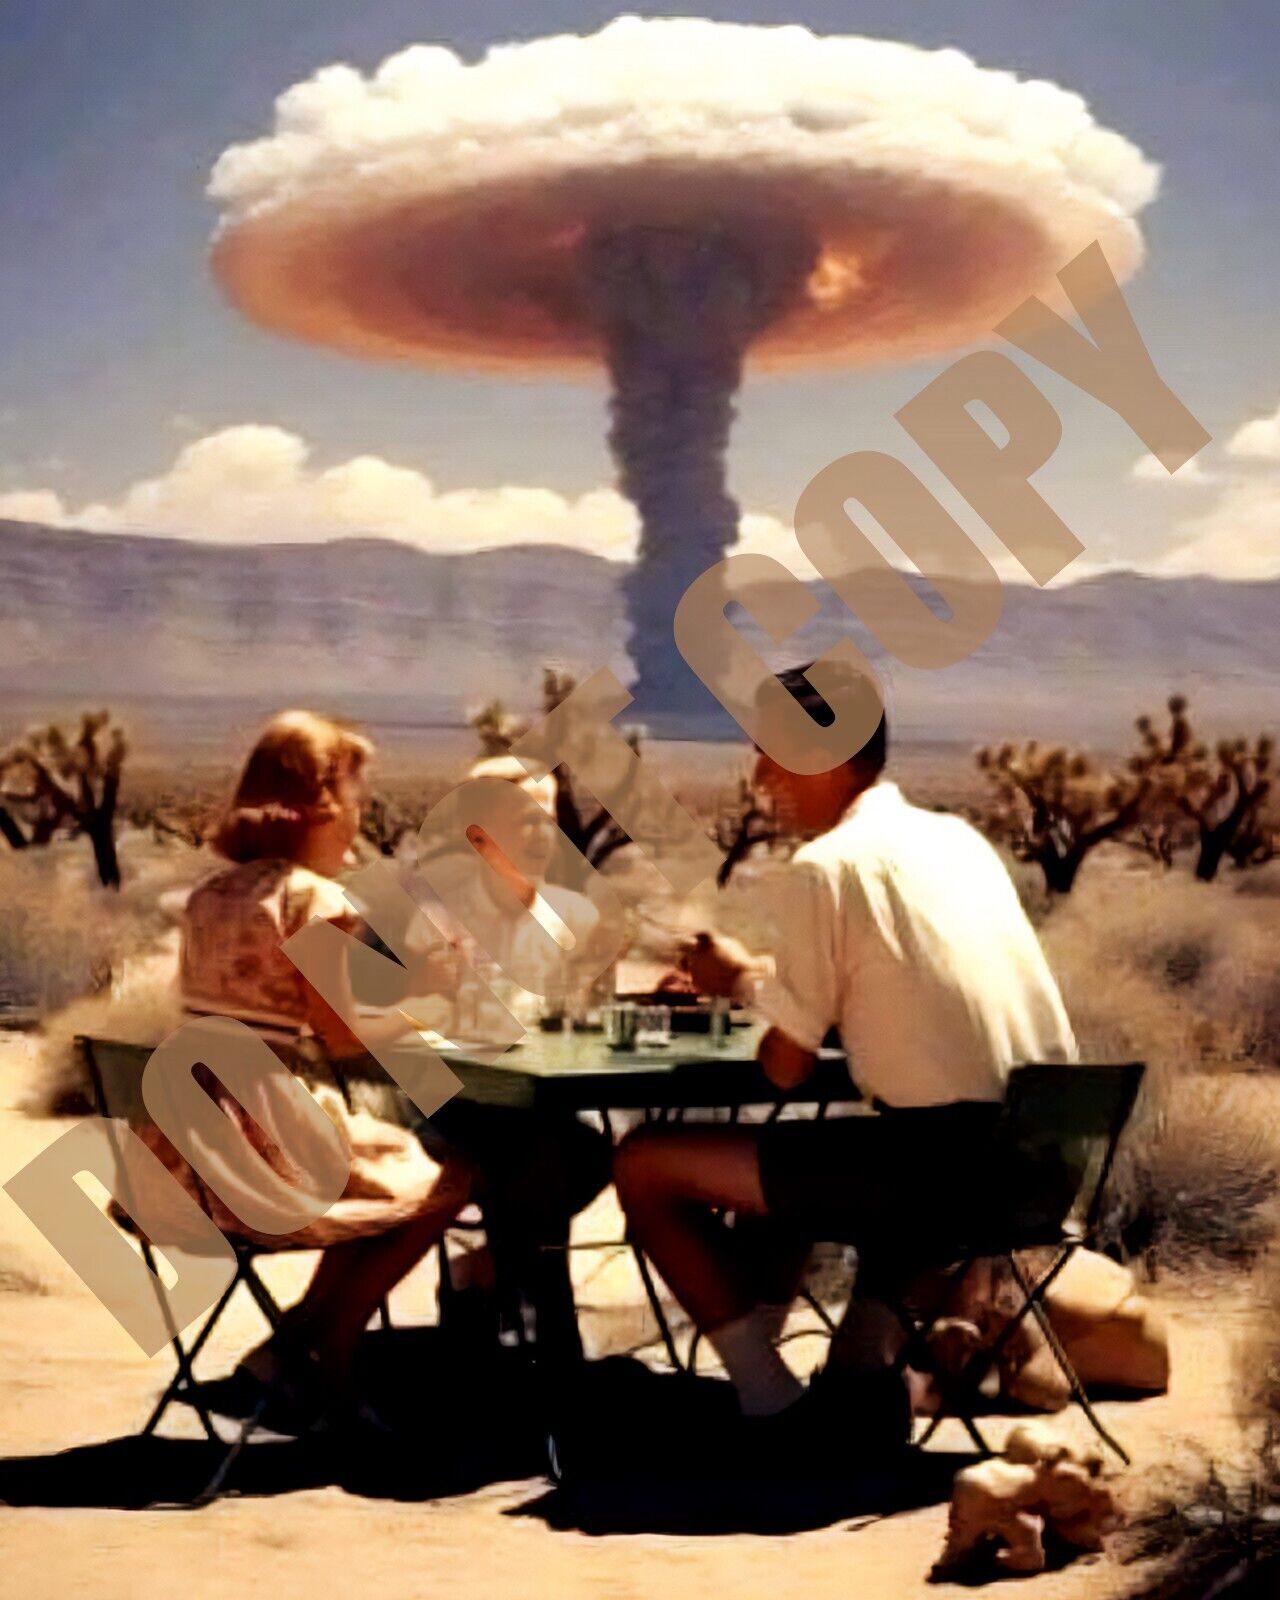 1950s Family Picnicking While Watching a Test At the Nevada Test Site 8x10 Photo